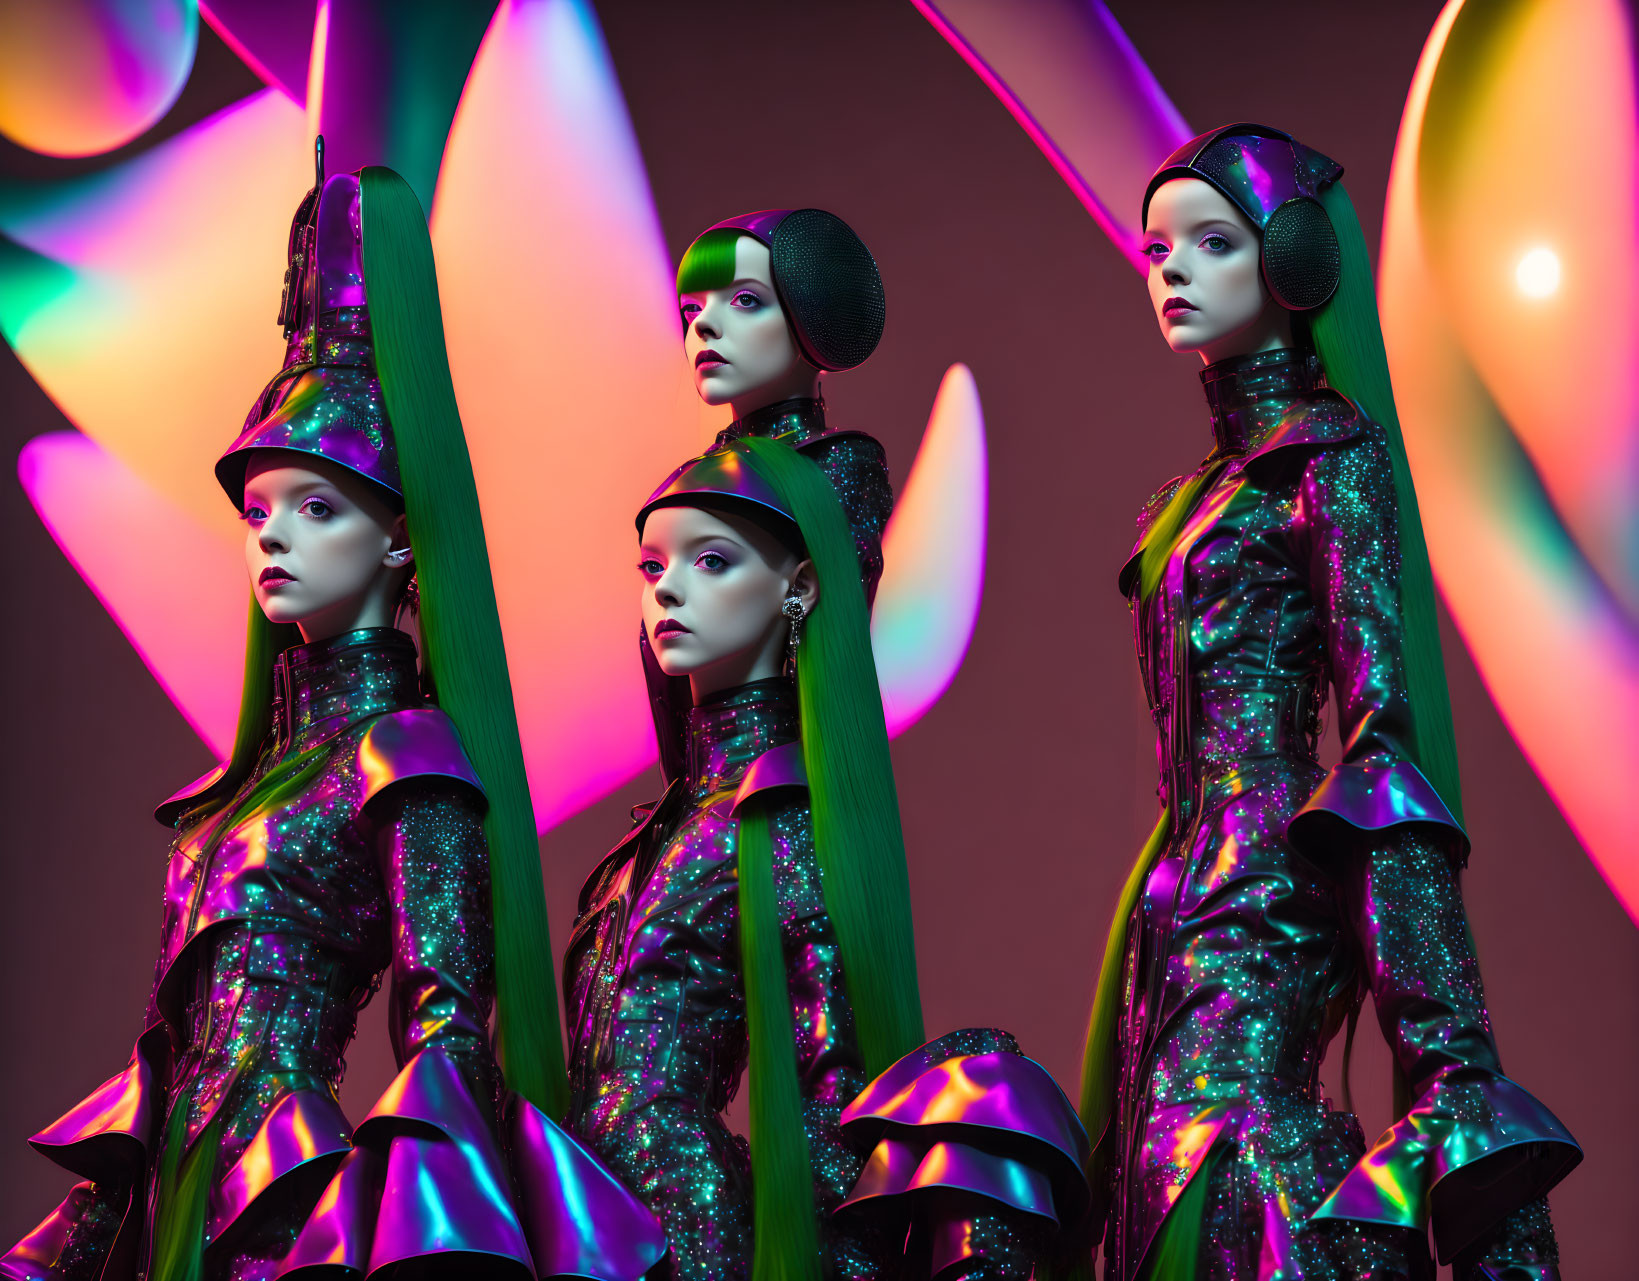 Four futuristic mannequins in green outfits with elongated headgear on colorful abstract background